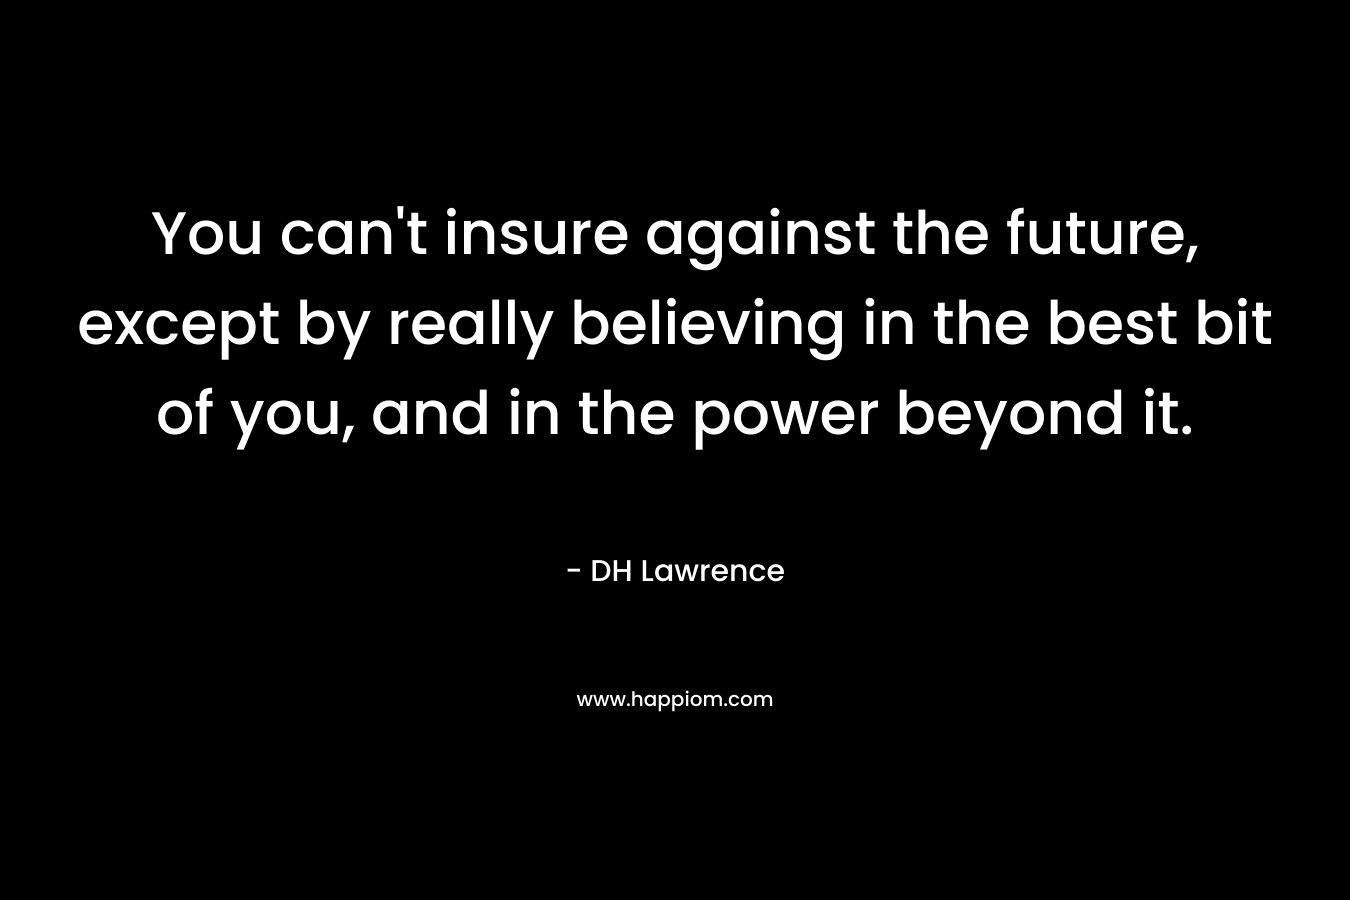 You can’t insure against the future, except by really believing in the best bit of you, and in the power beyond it. – DH Lawrence